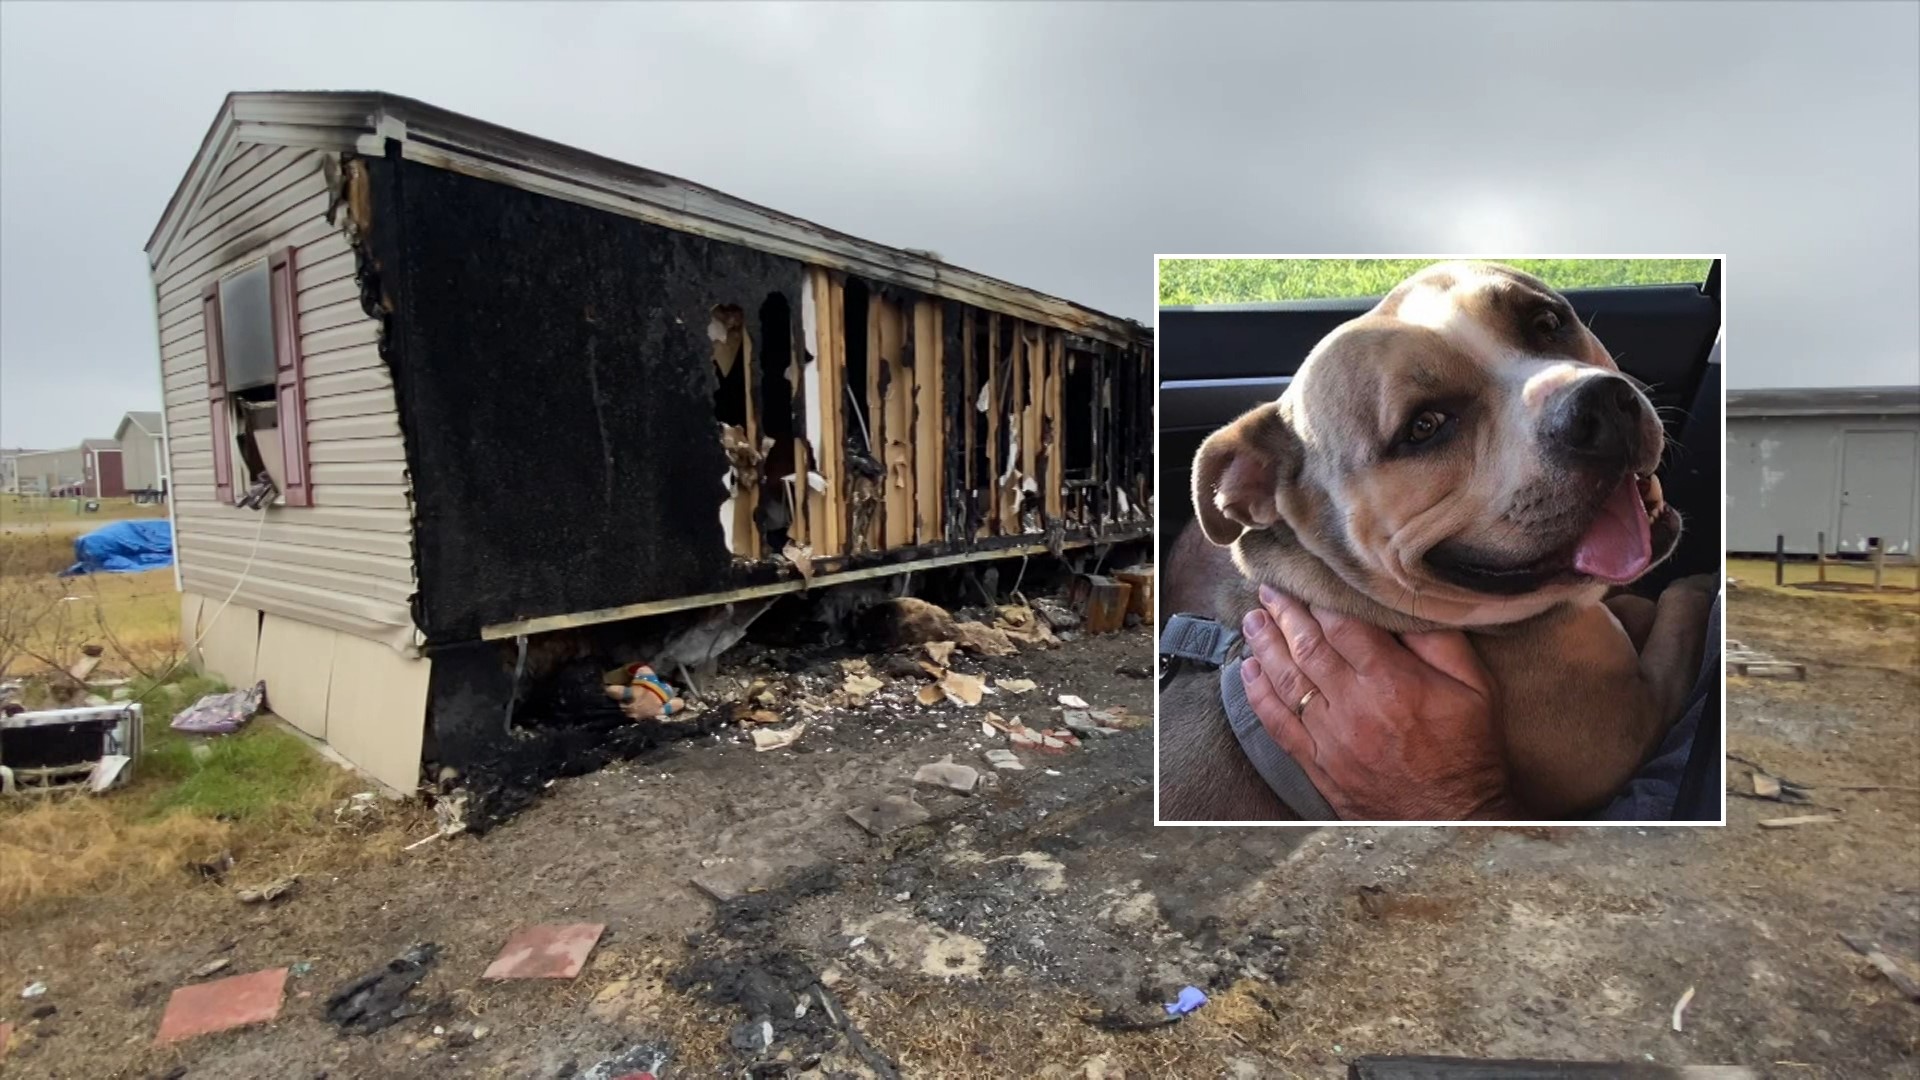 The family says they lost seven dogs in the fire, but saved four. The actions of their pit bull, Ollie, prevented the loss from being even greater.